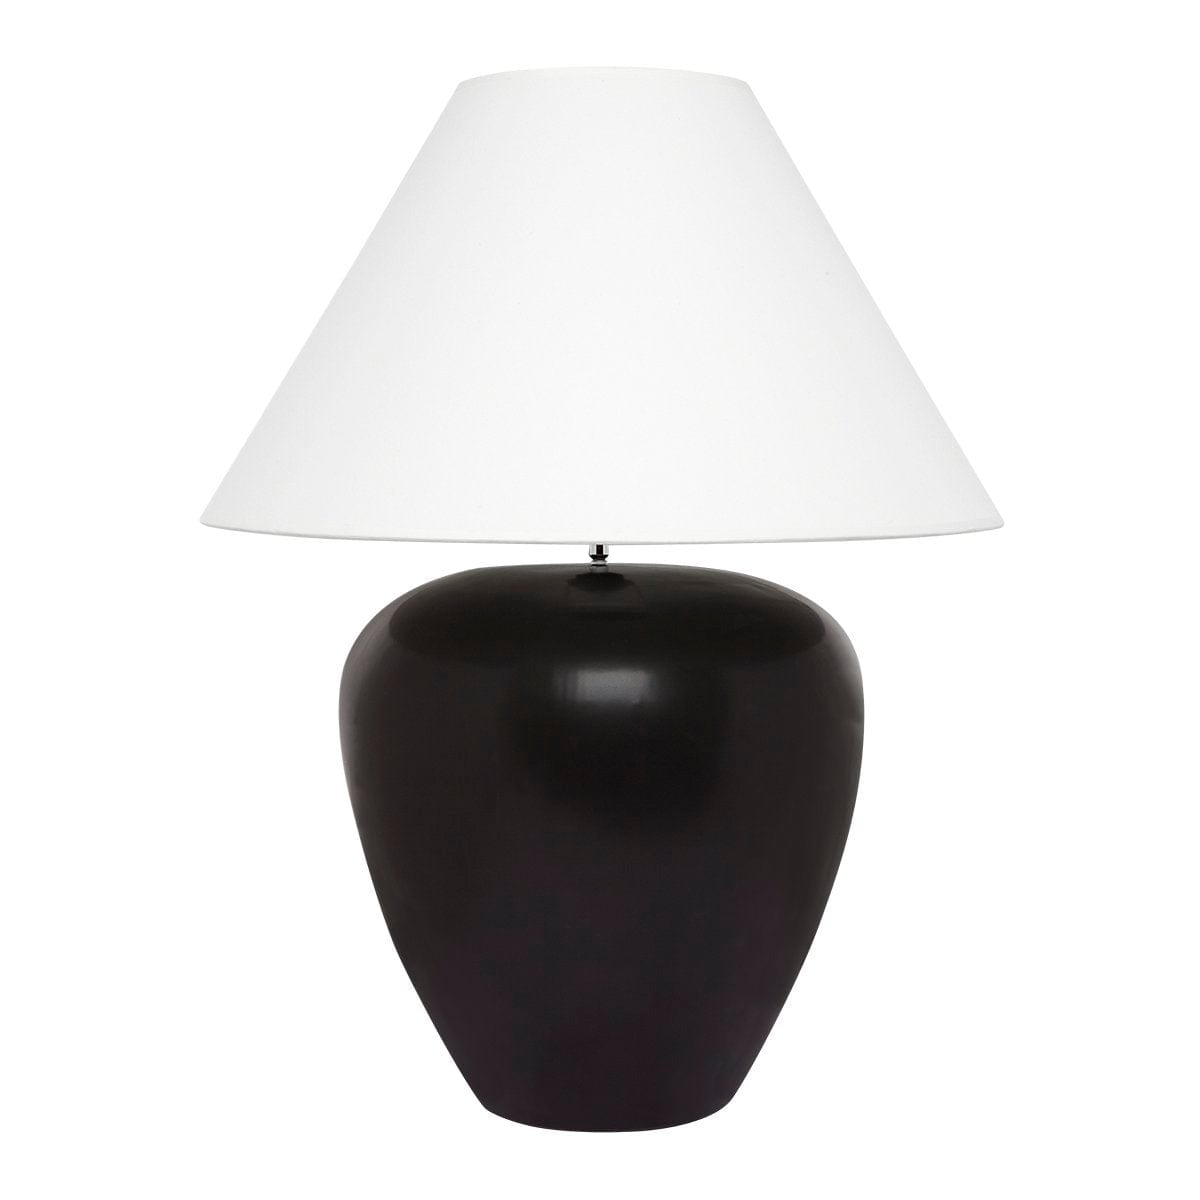 CAFE LIGHTING & LIVING Table Lamp Picasso Table Lamp - Black w White Shade B13286